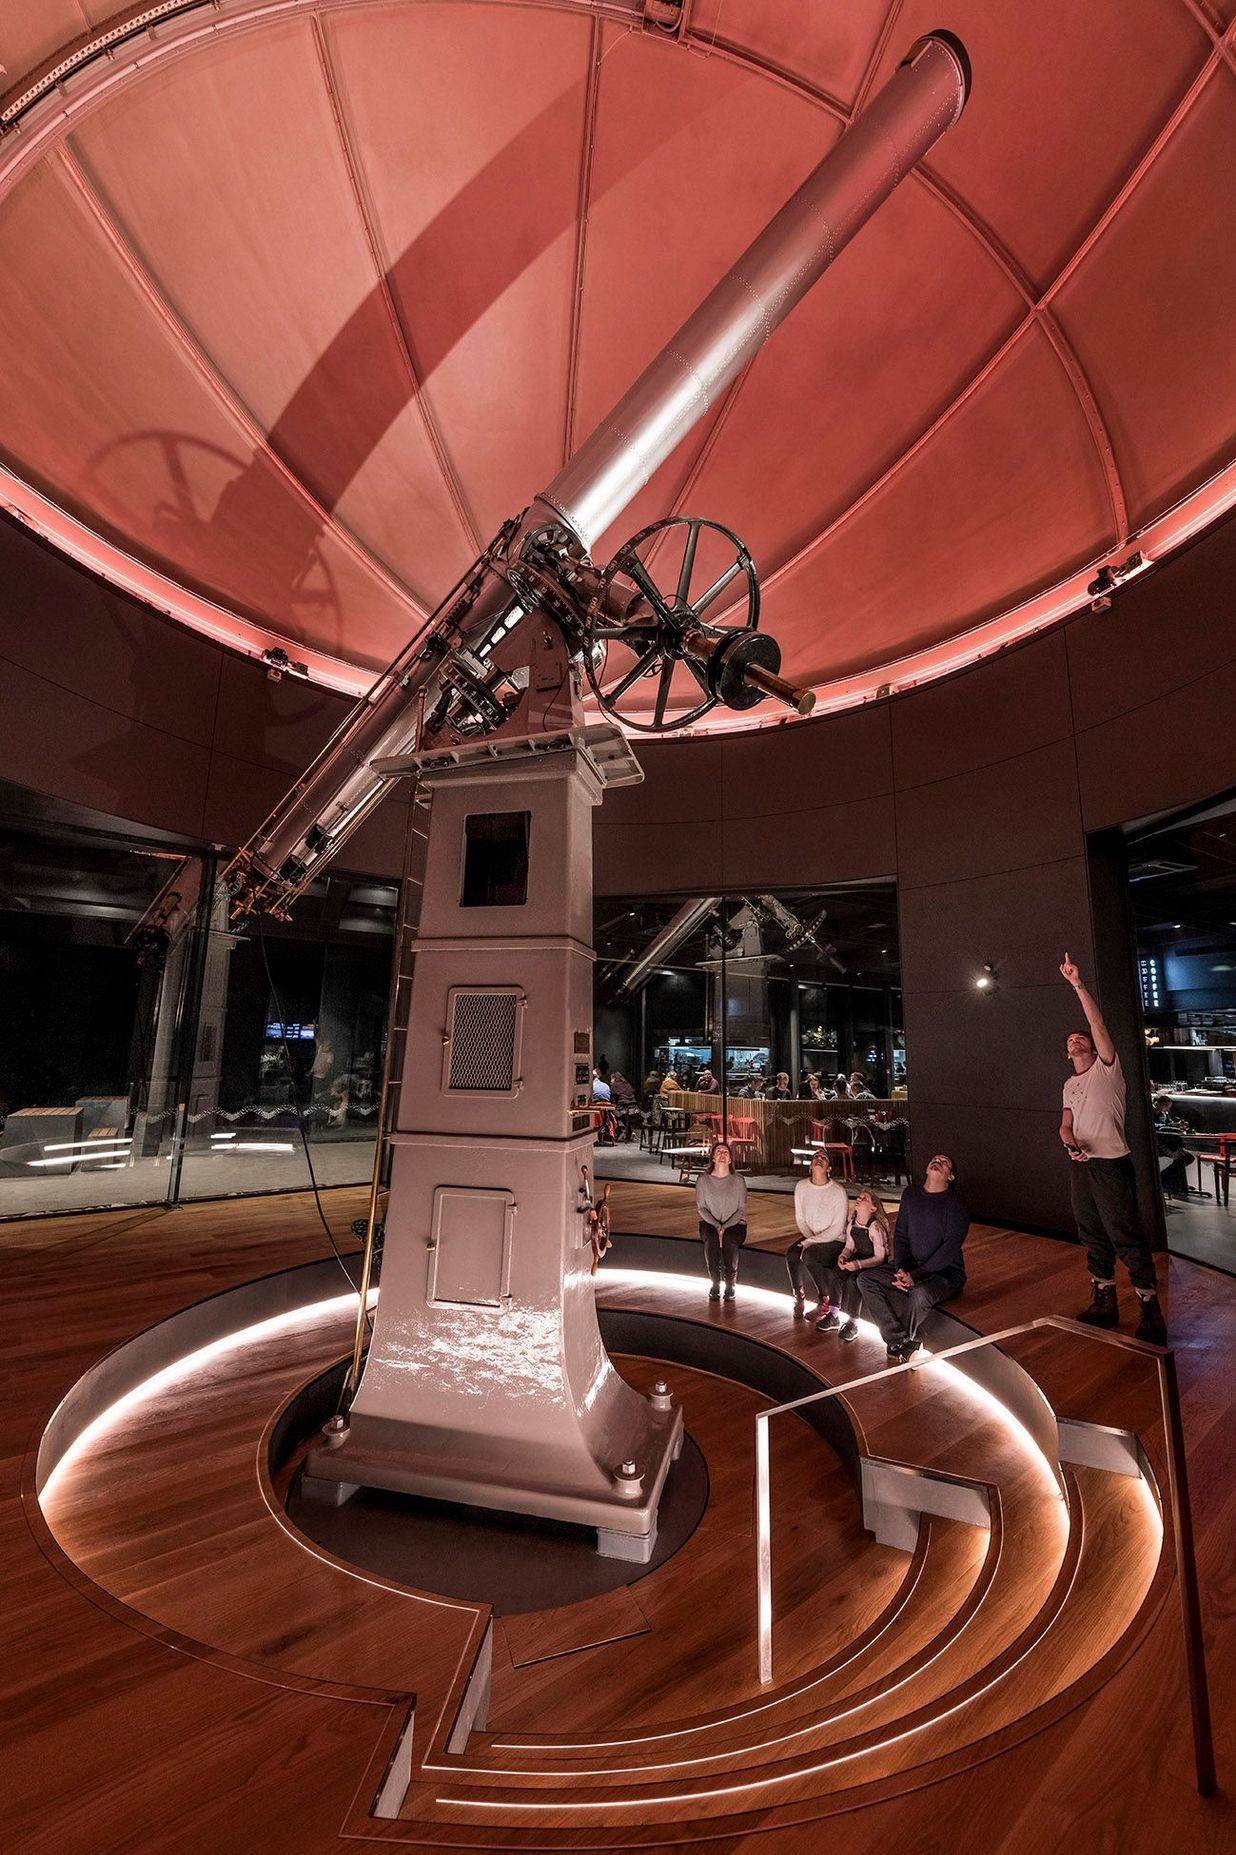 The 130-year-old telescope at the Dark Sky Project.